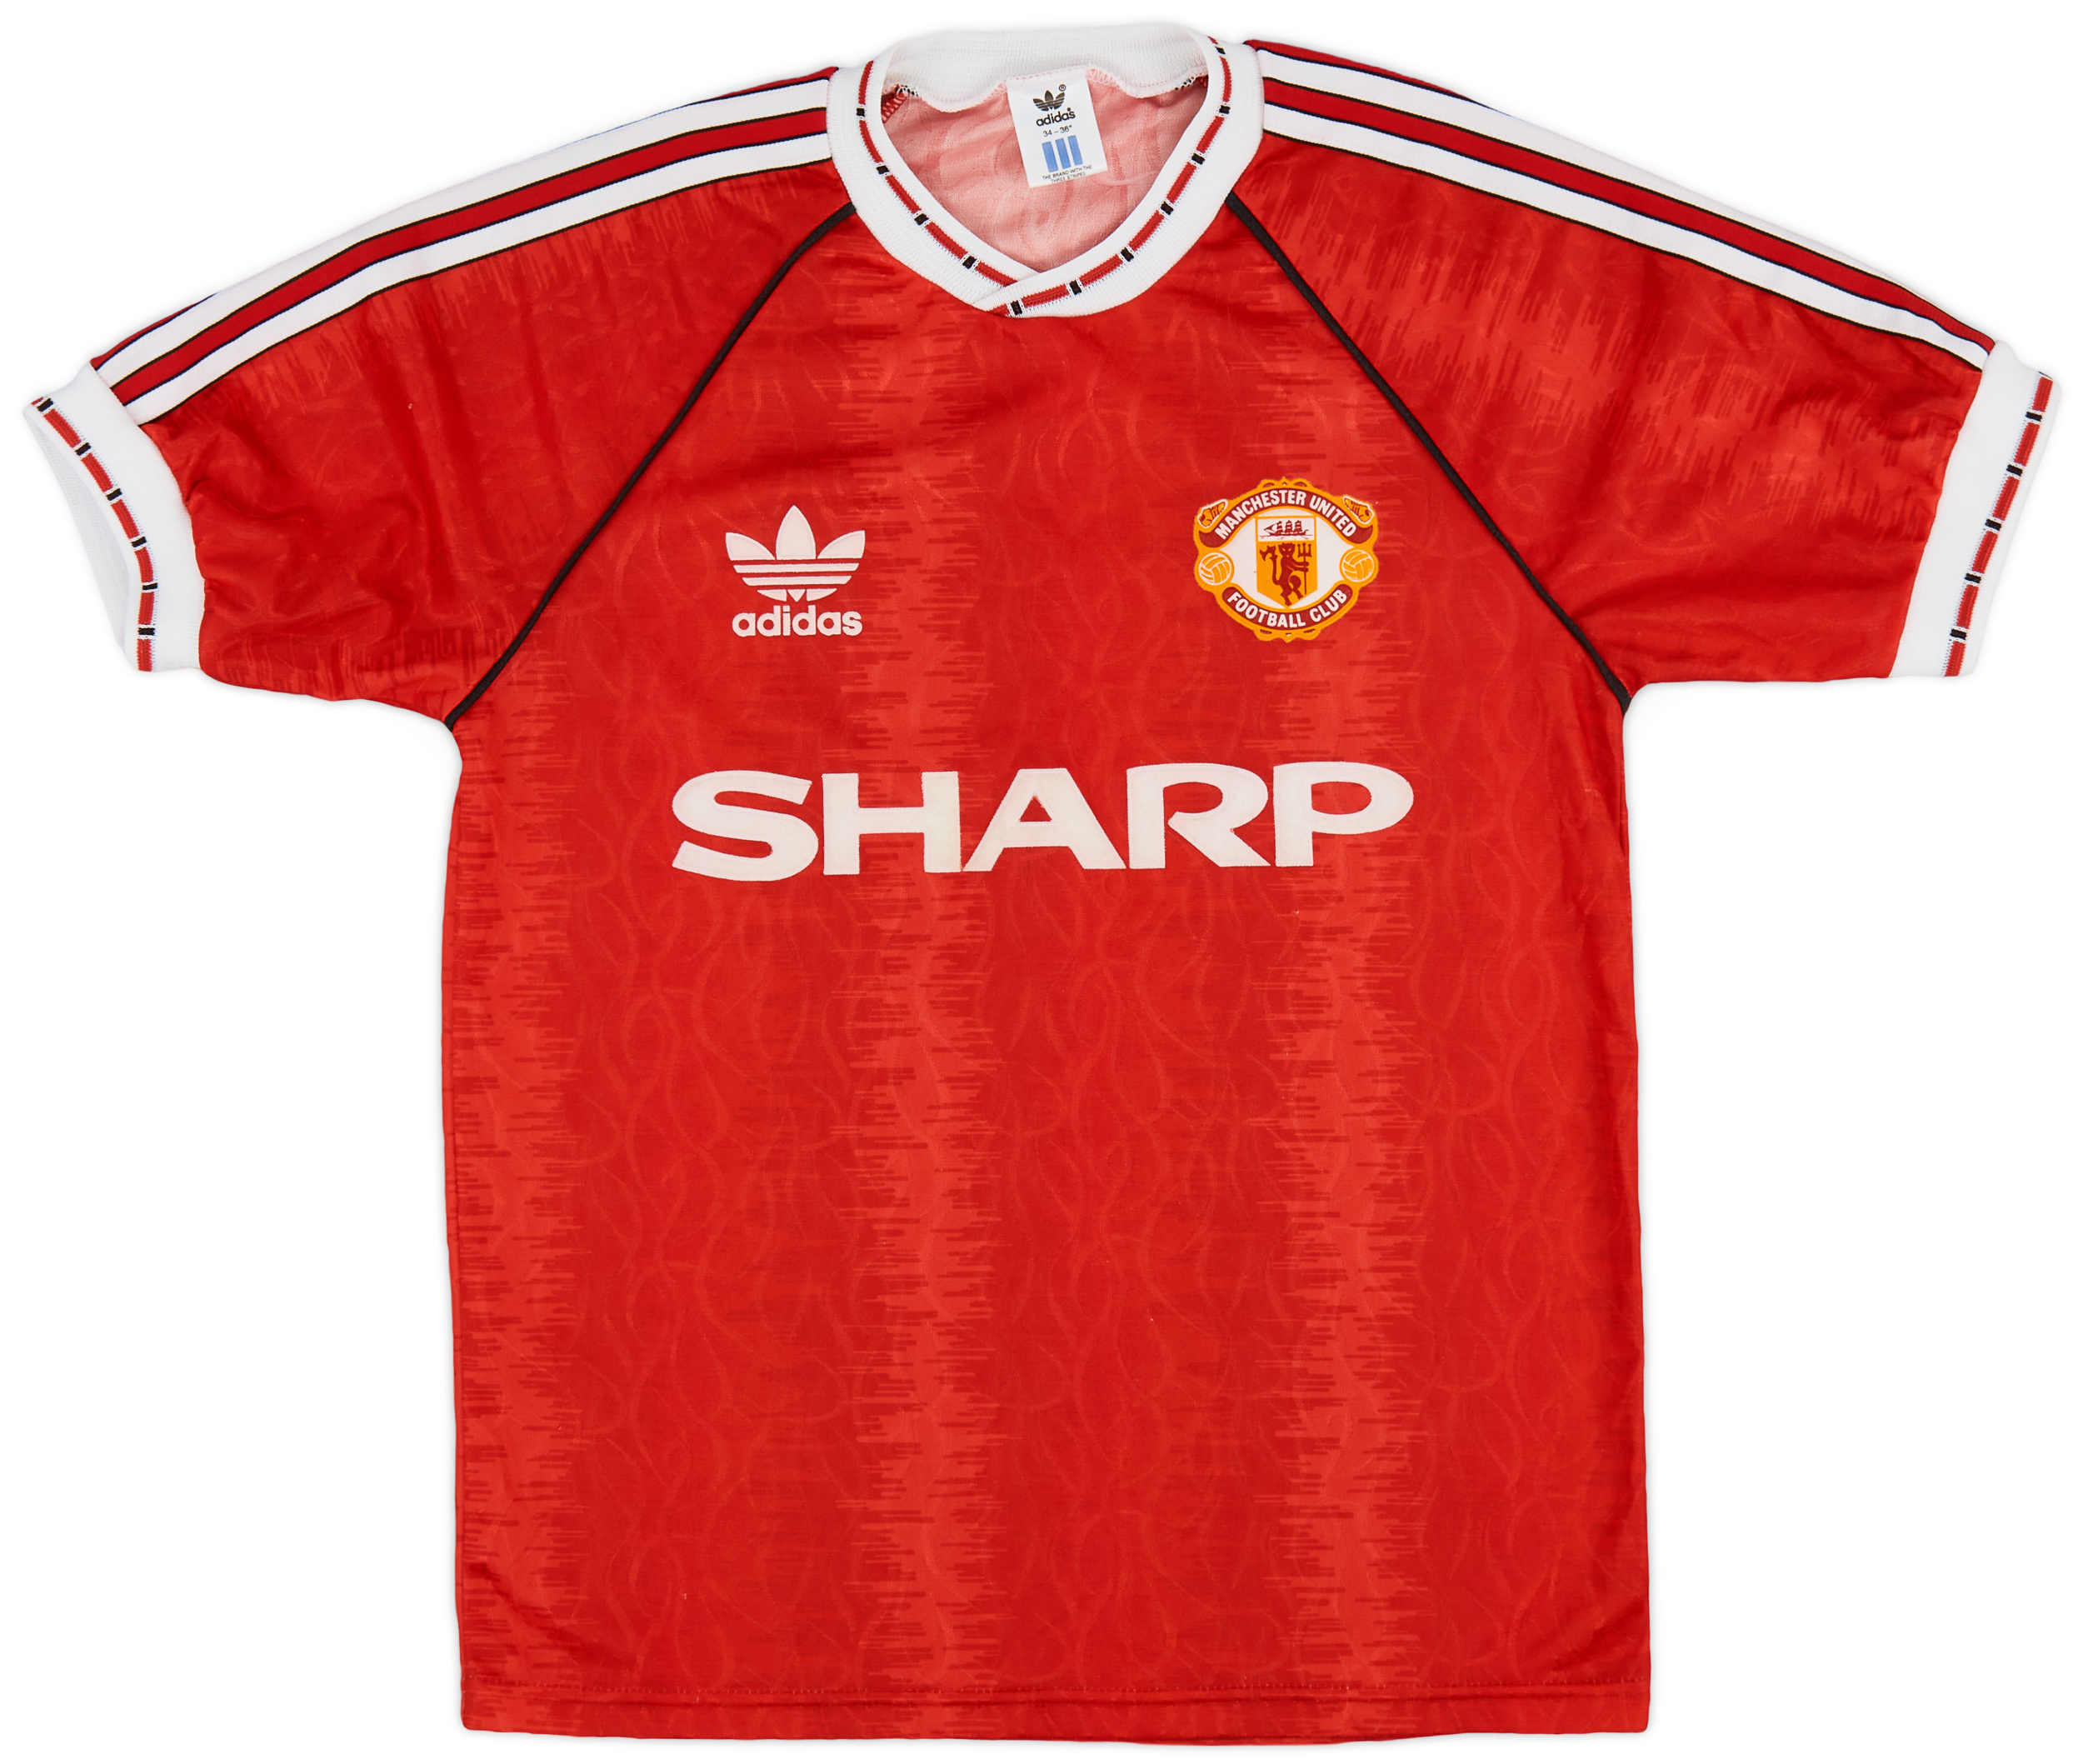 1990-92 Manchester United Home Shirt - 9/10 - ()